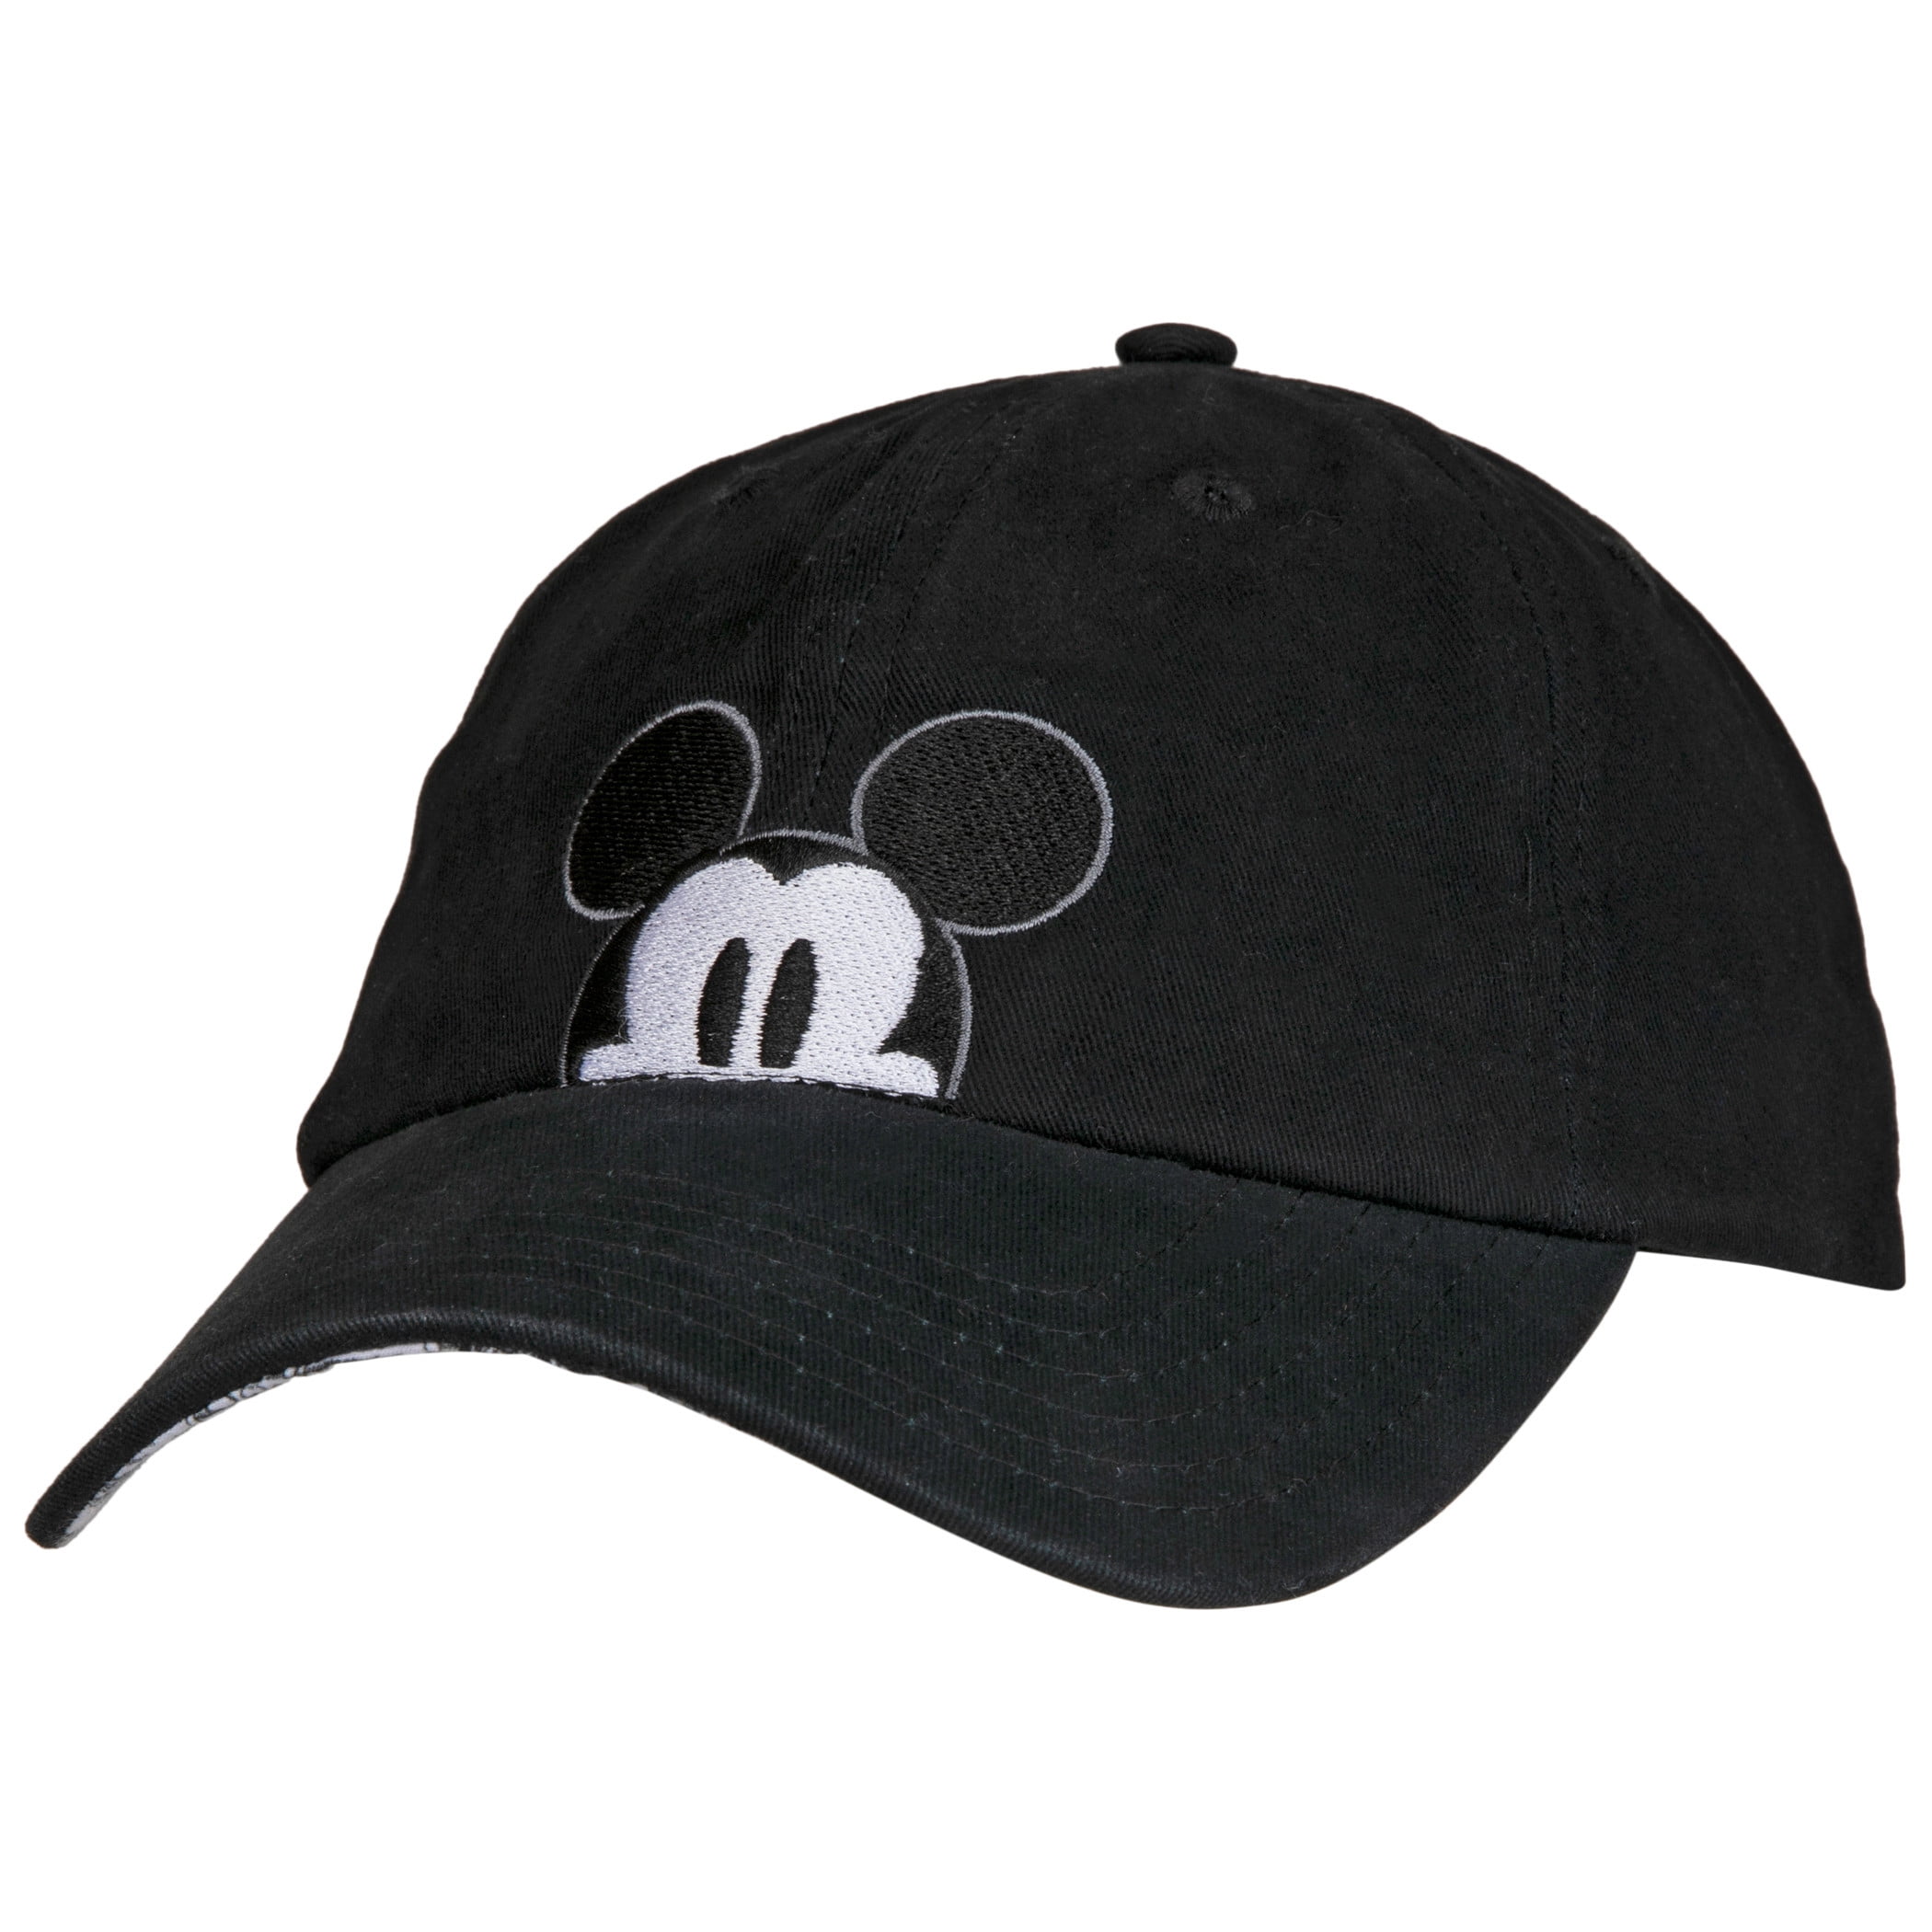 Washed Twill Cotton Adjustable Dad Cap Concept One Disney Mickey Mouse Baseball Hat